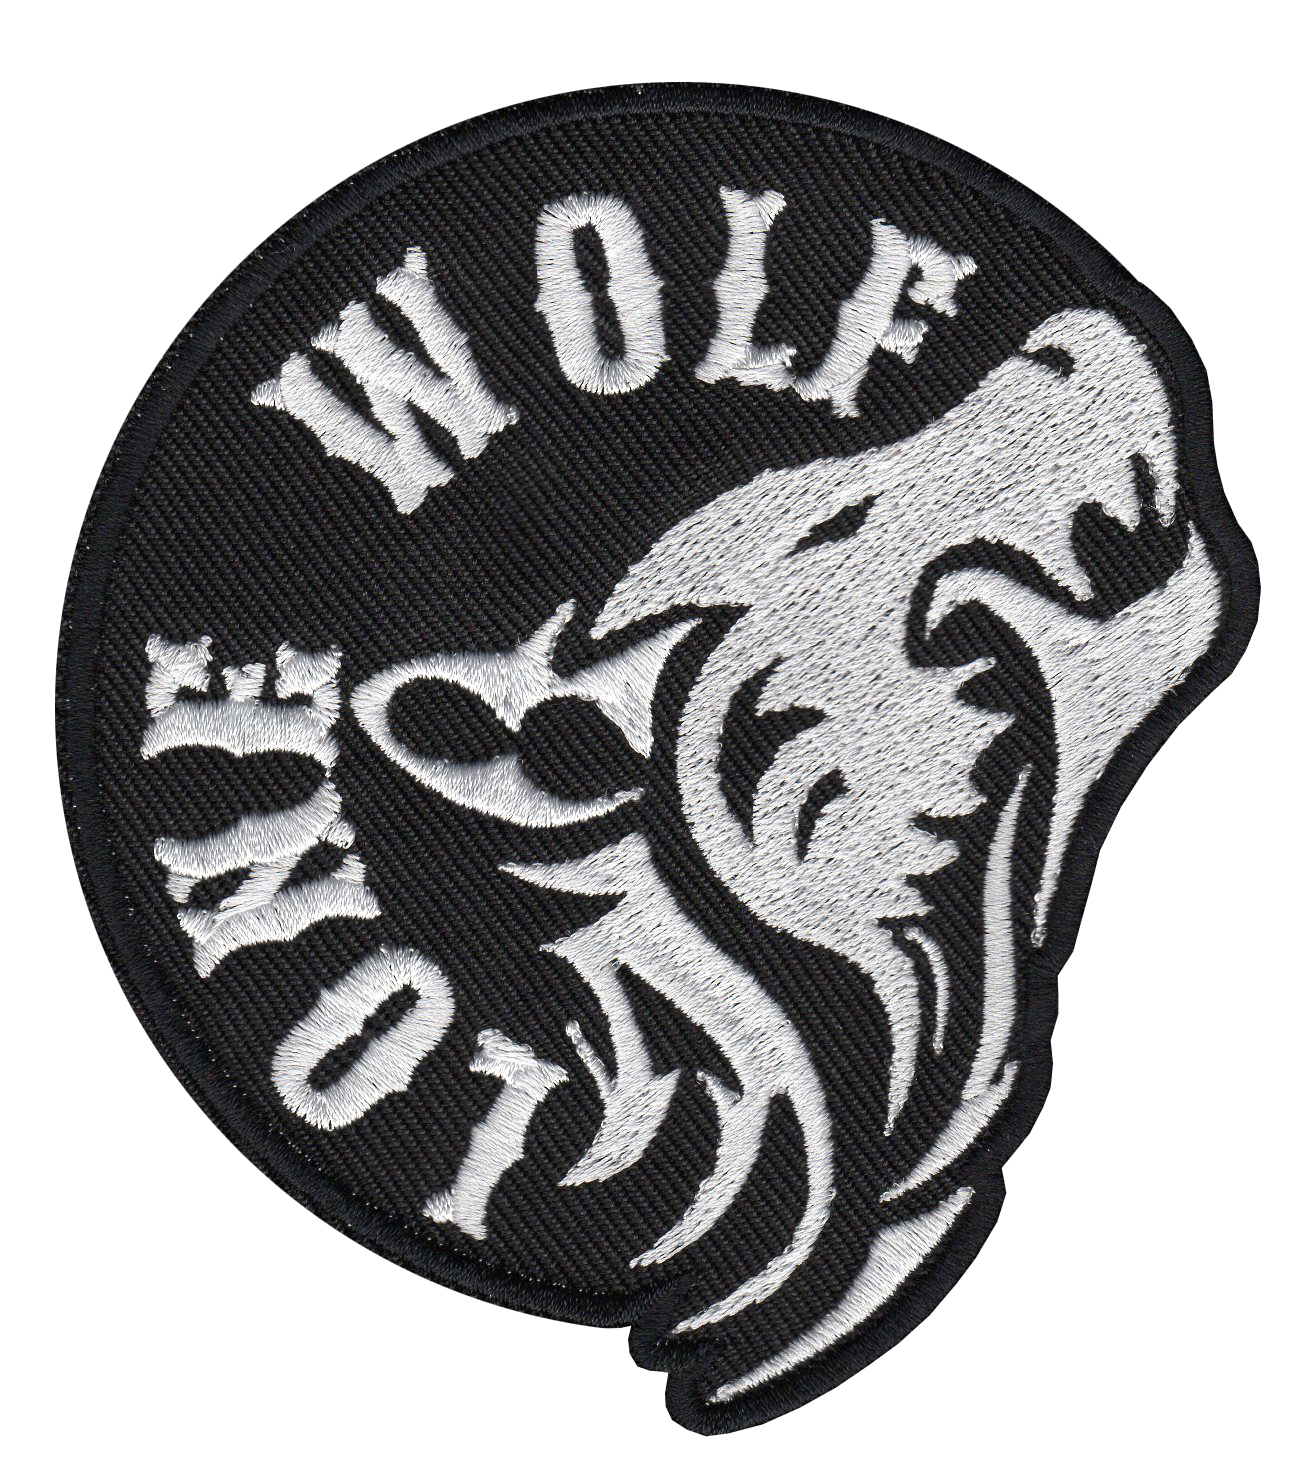 TRIBAL WOLF Embroidery BIKER PATCH 